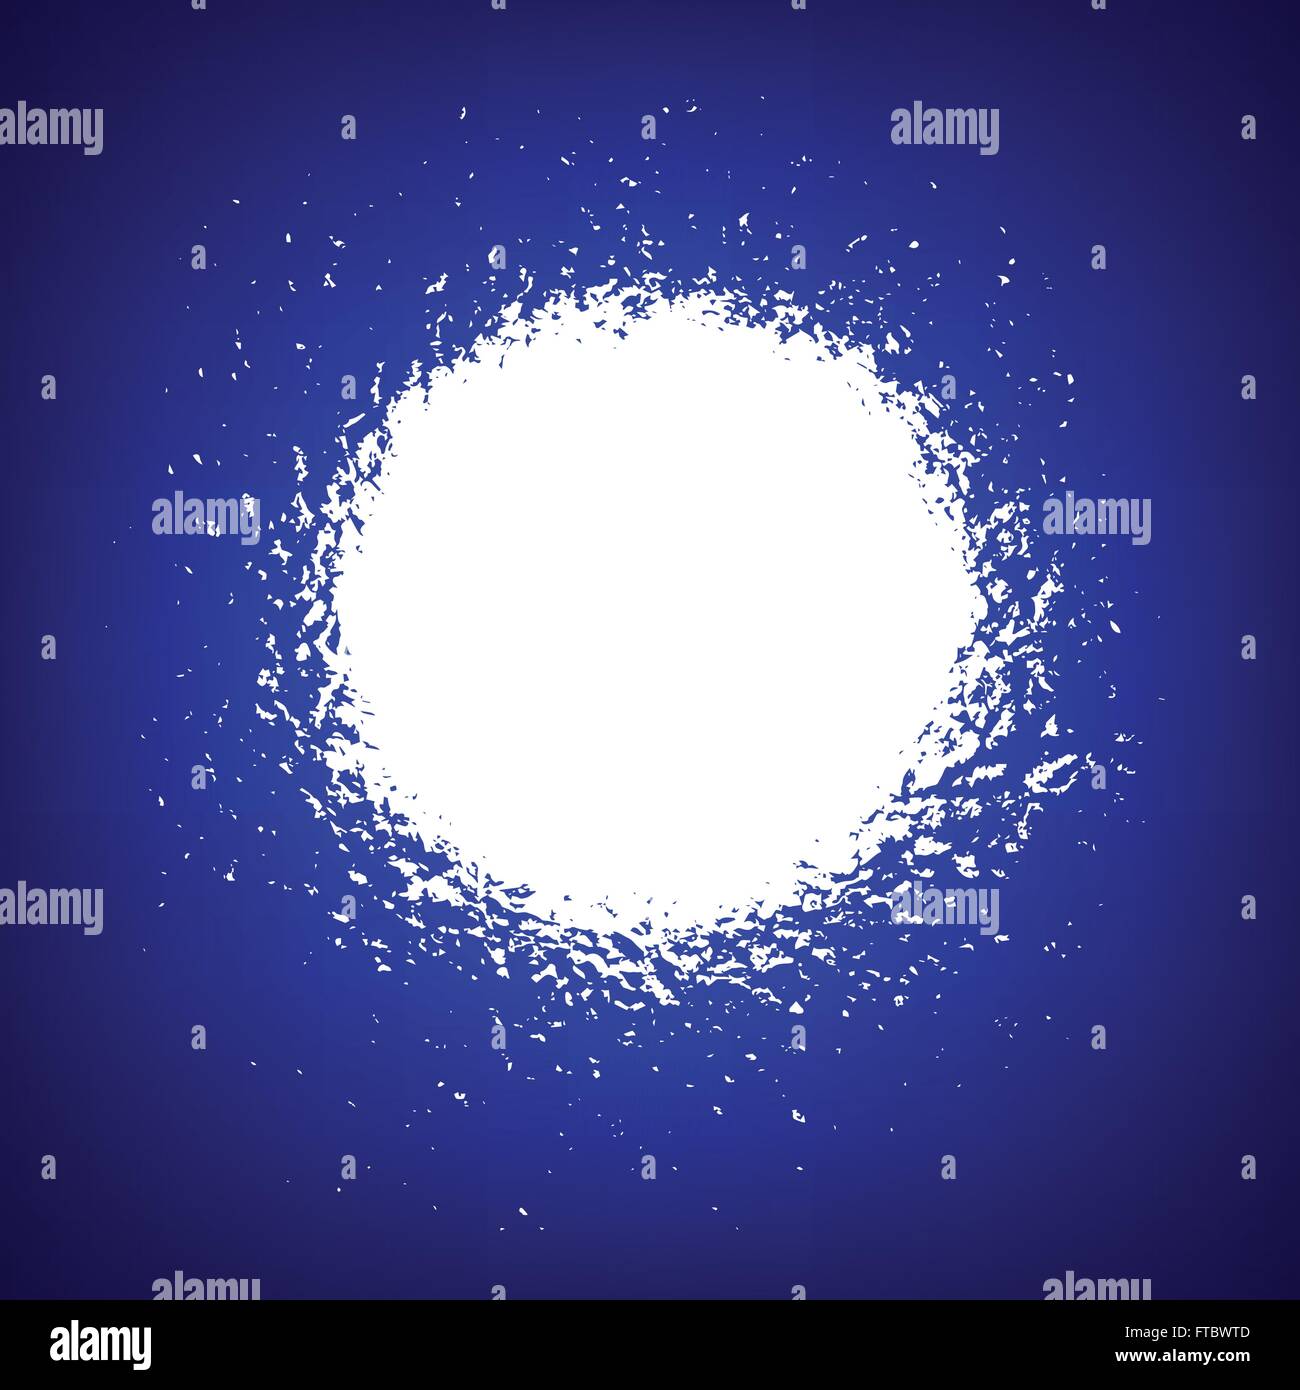 Illustration of bright flash, explosion or burst on a blue background Stock Vector